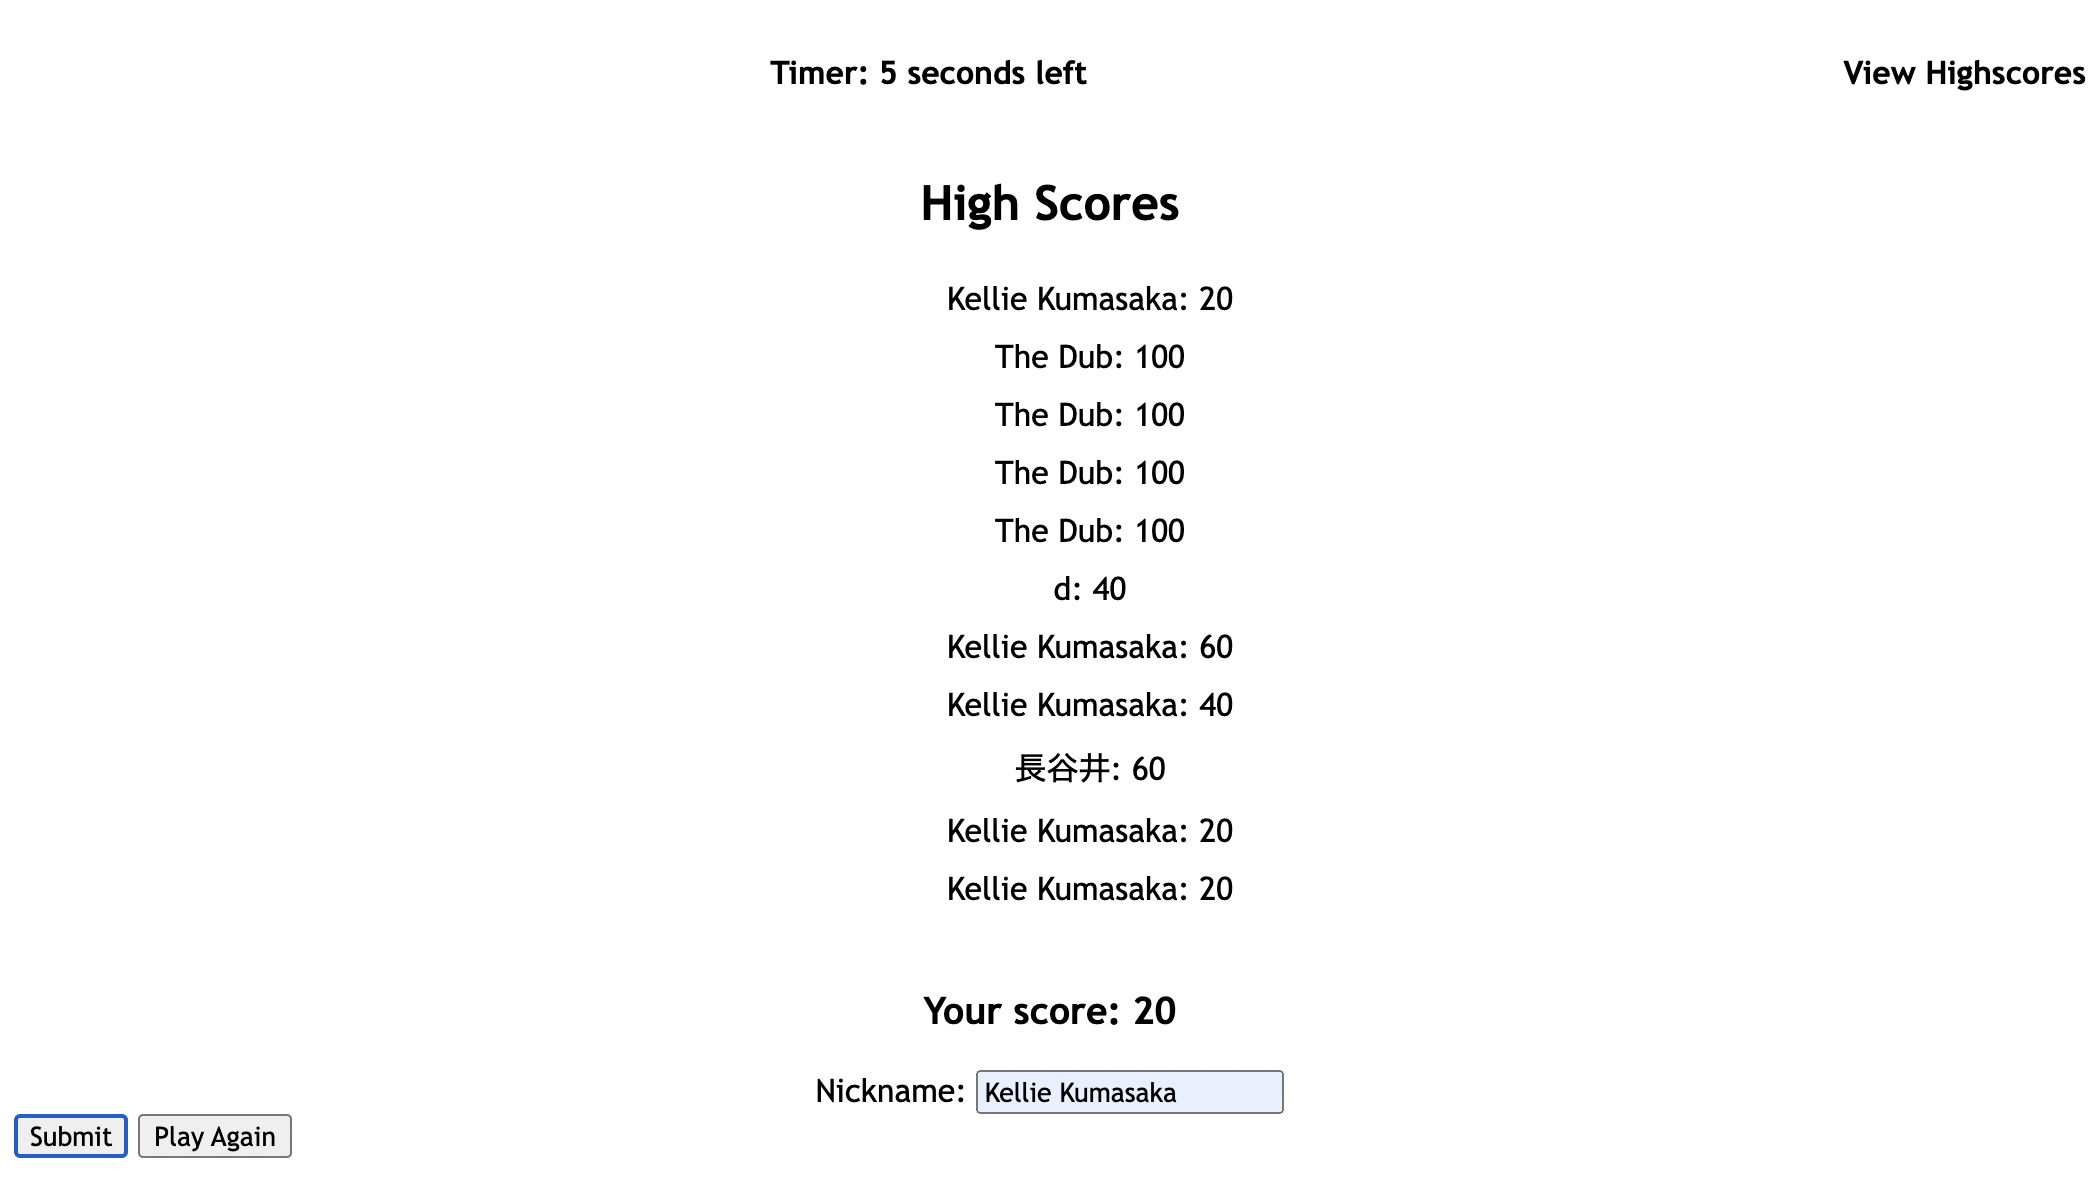 The highscore standings are shown here